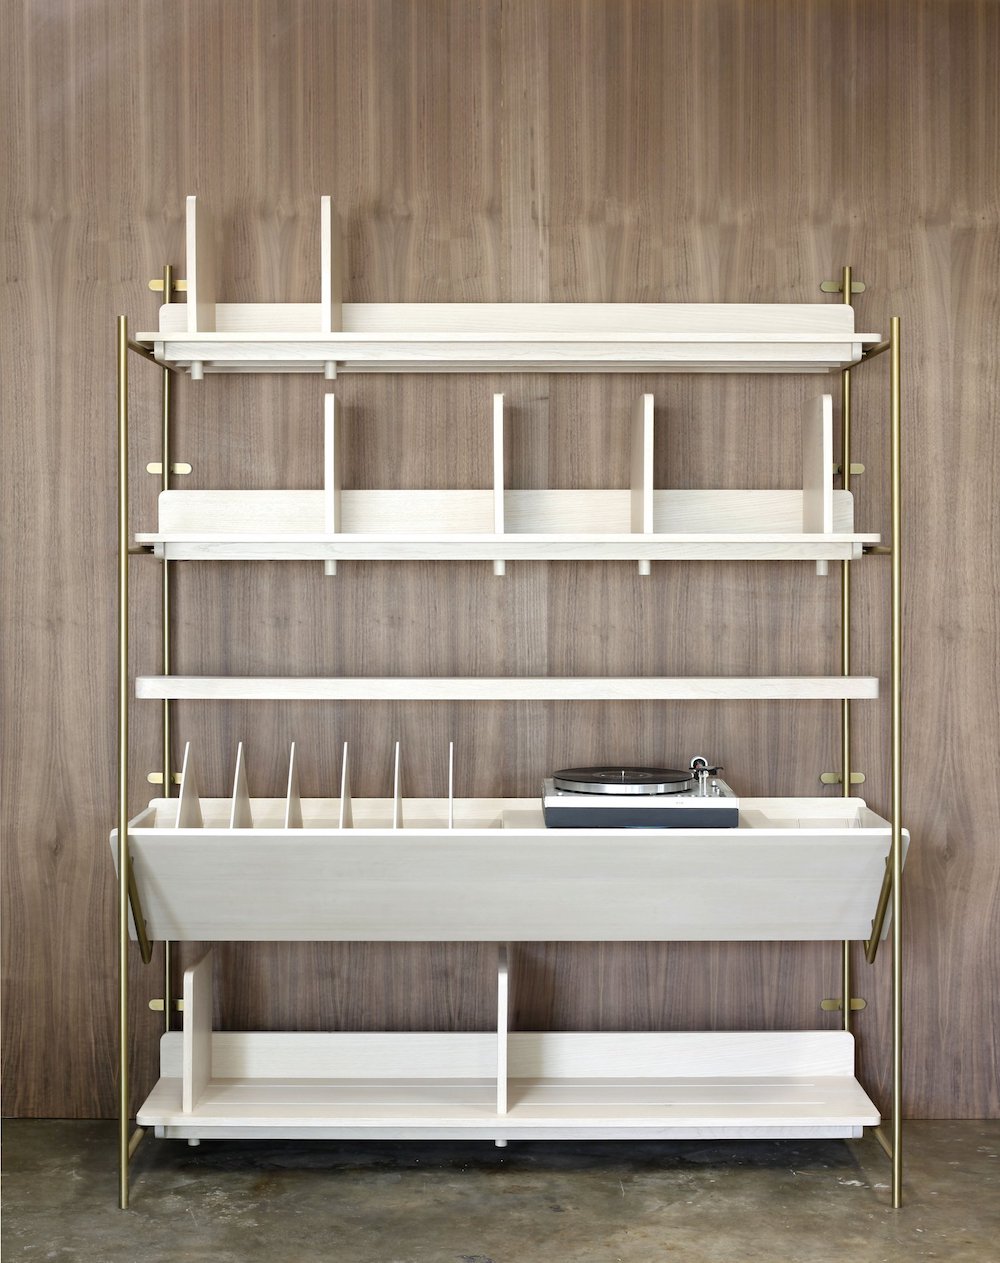 wall unit designed to hold record albums